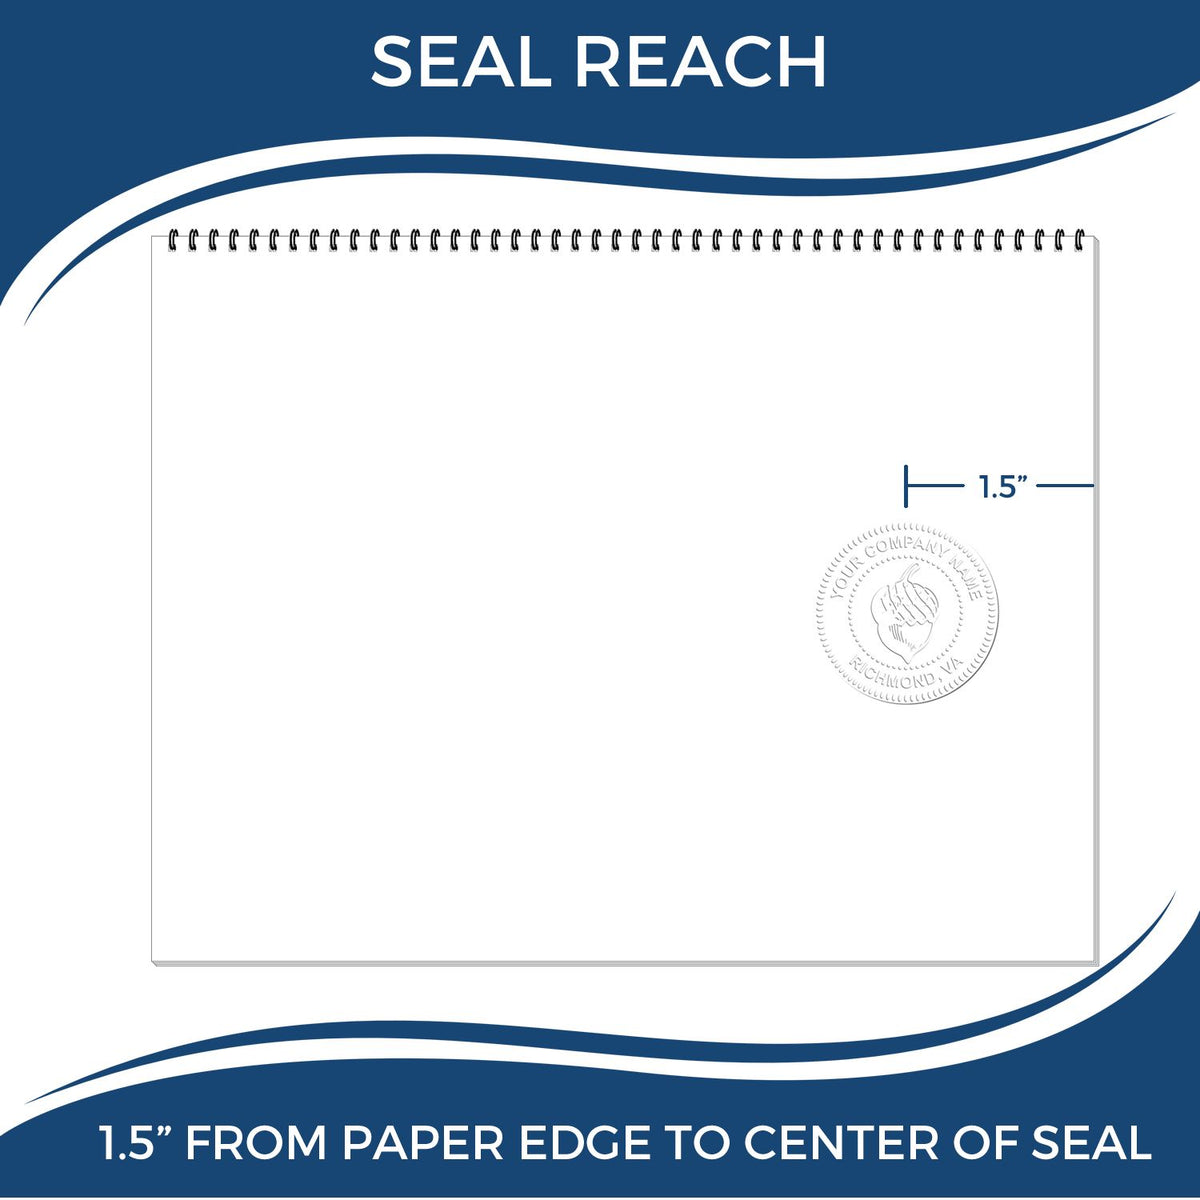 An infographic showing the seal reach which is represented by a ruler and a miniature seal image of the Hybrid District of Columbia Architect Seal